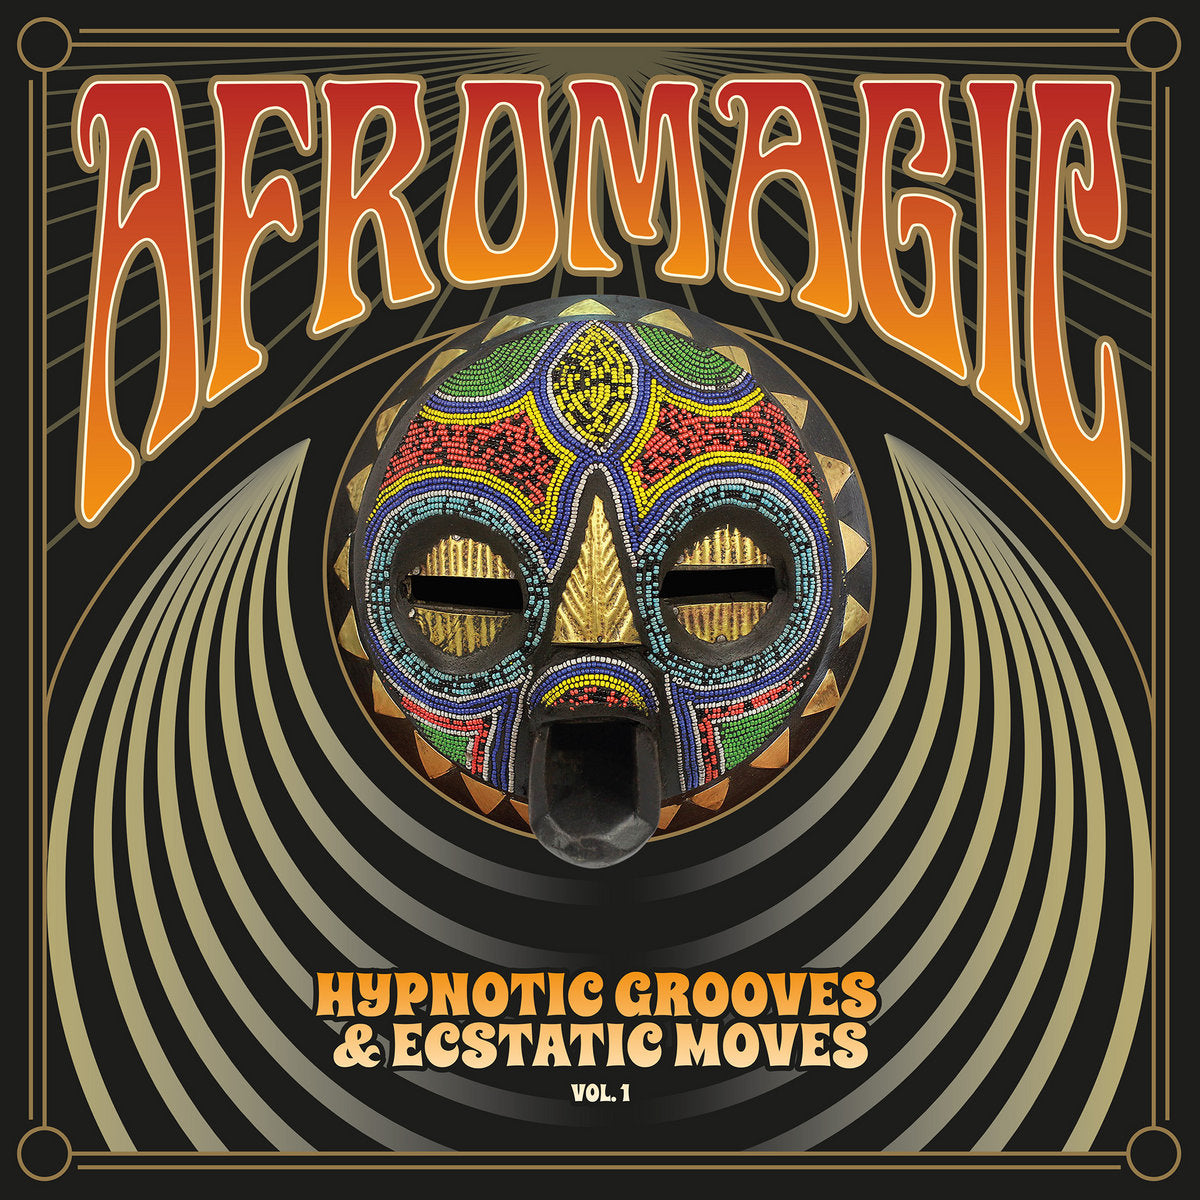 V/A - AfroMagic Vol.1 - Hypnotic Grooves & Ecstatic Moves